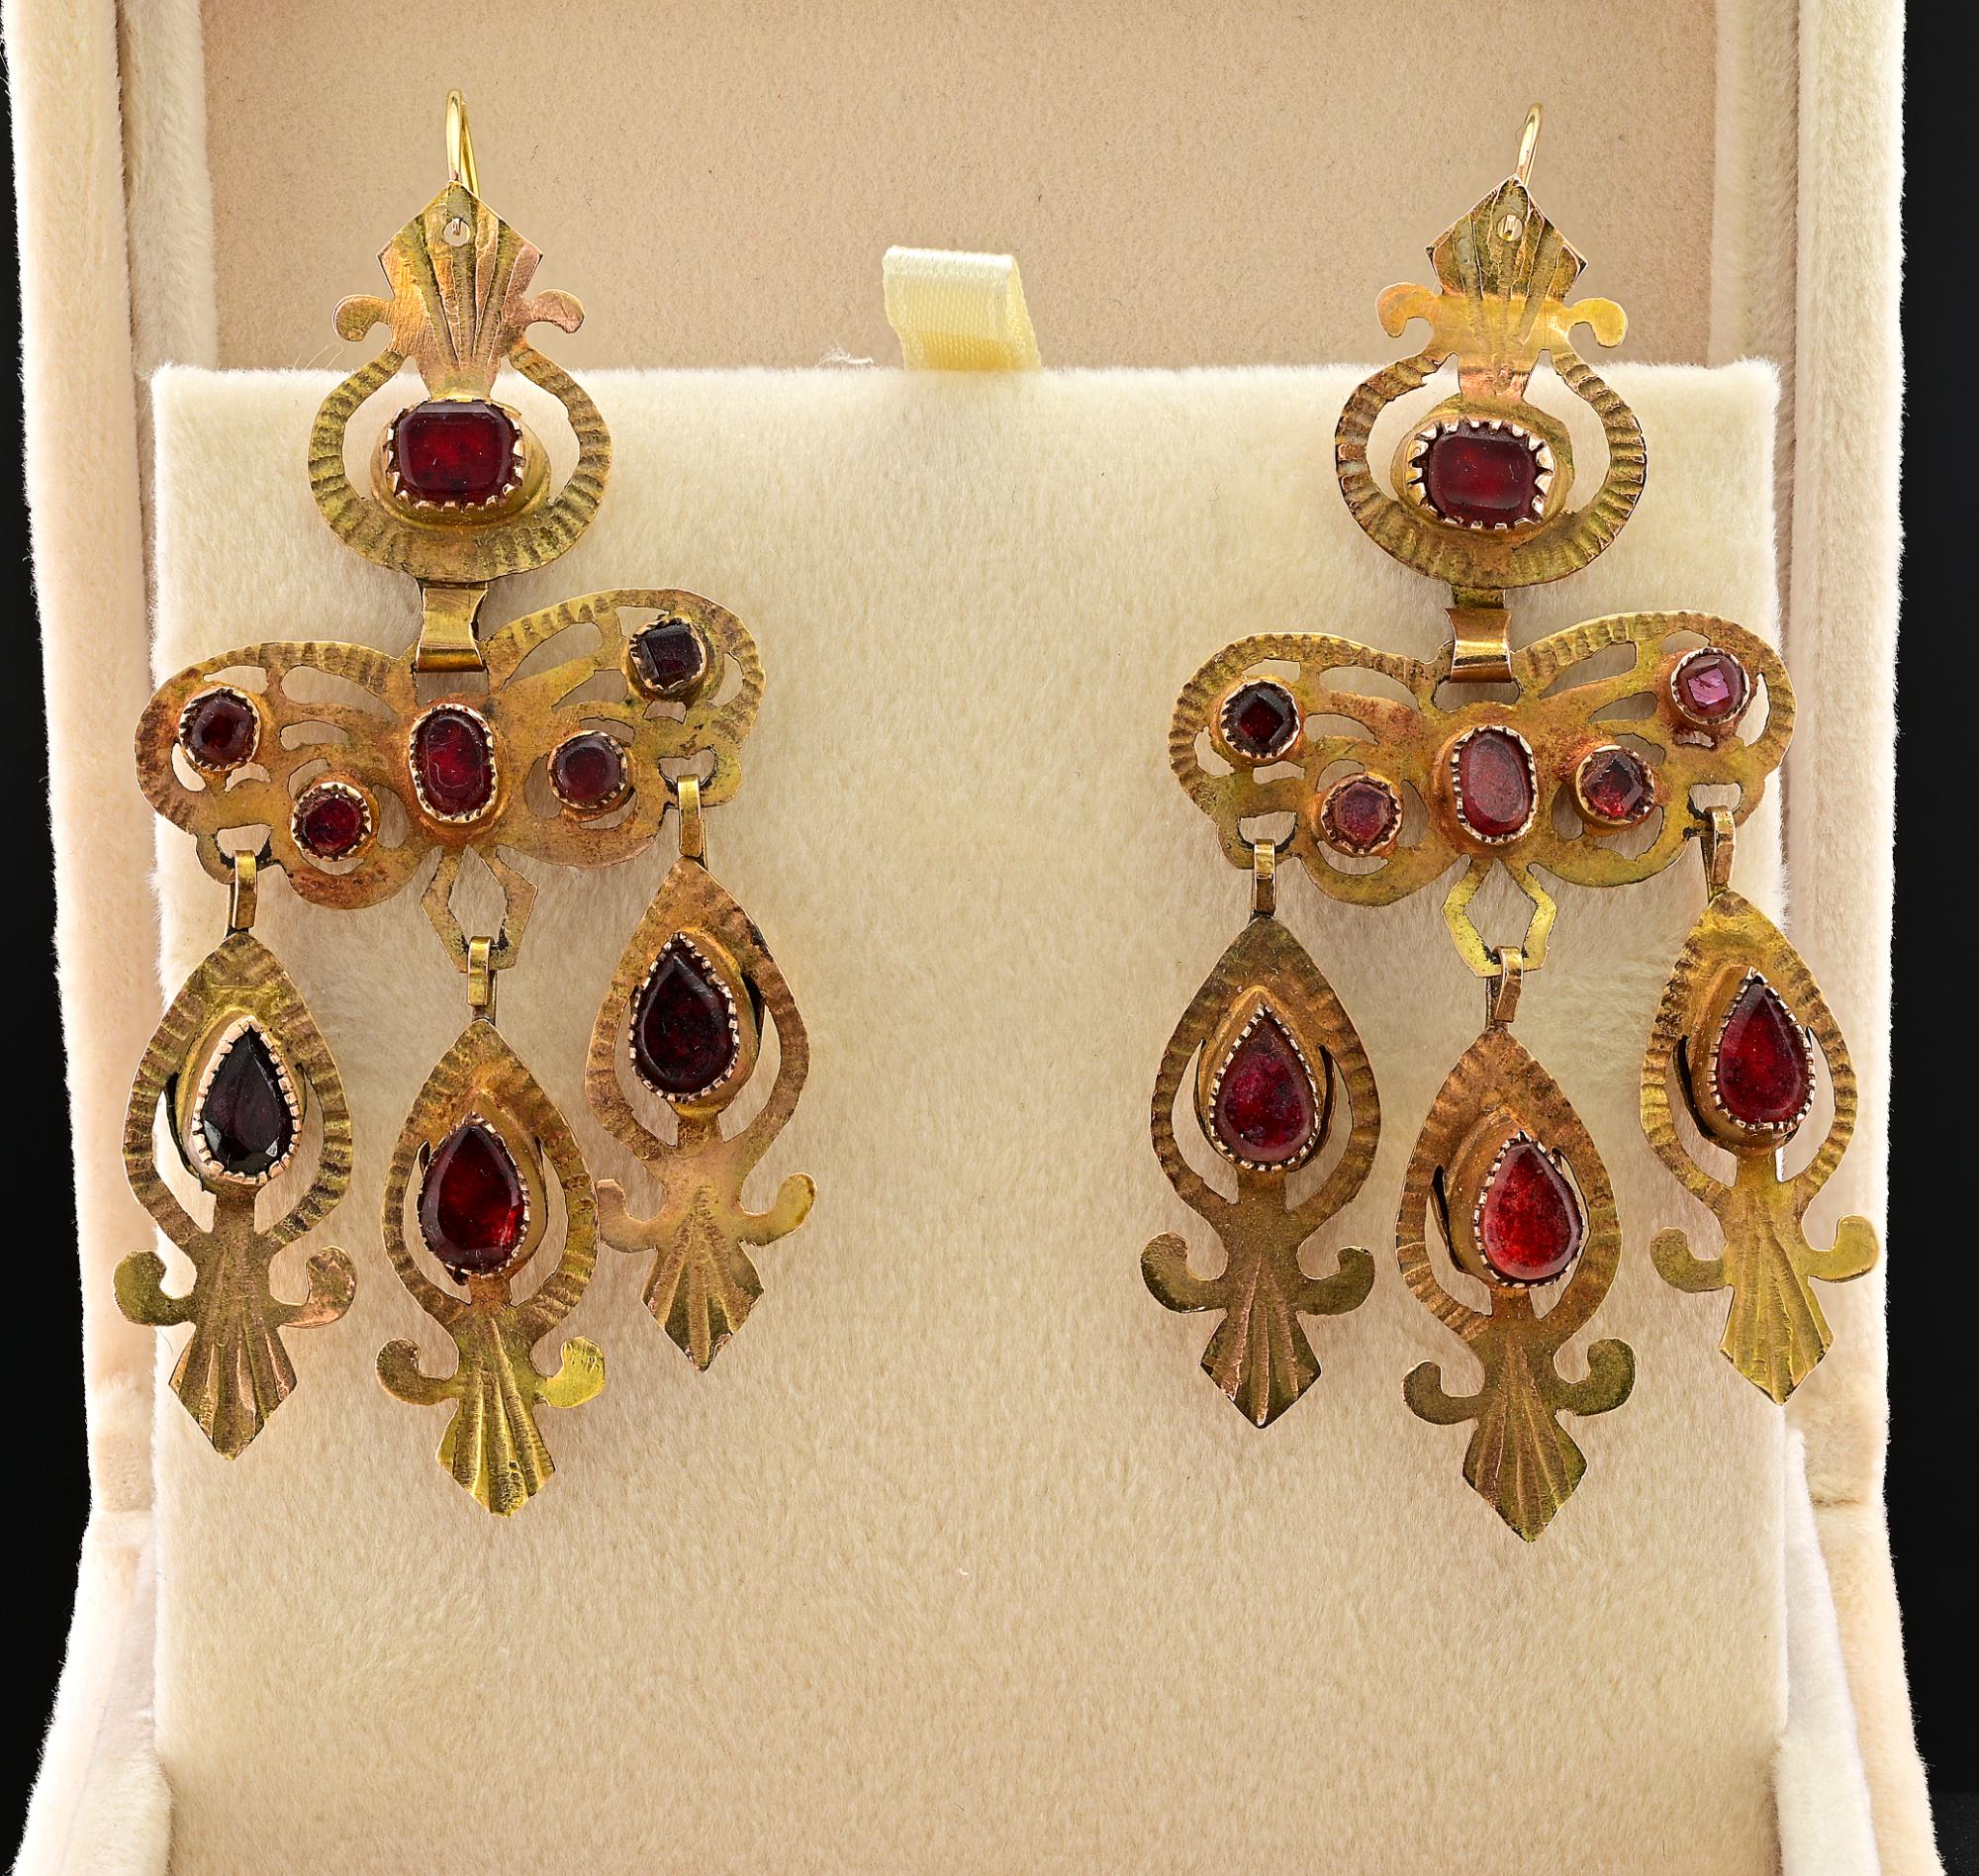 These festive antique Rococo earrings are early 1700 circa (we strongly believe to be actually older, sometime between the mid 1600 to 1650 circa
The French Rococo theme began to take hold in the late 1600s and expanded into the beginning of the